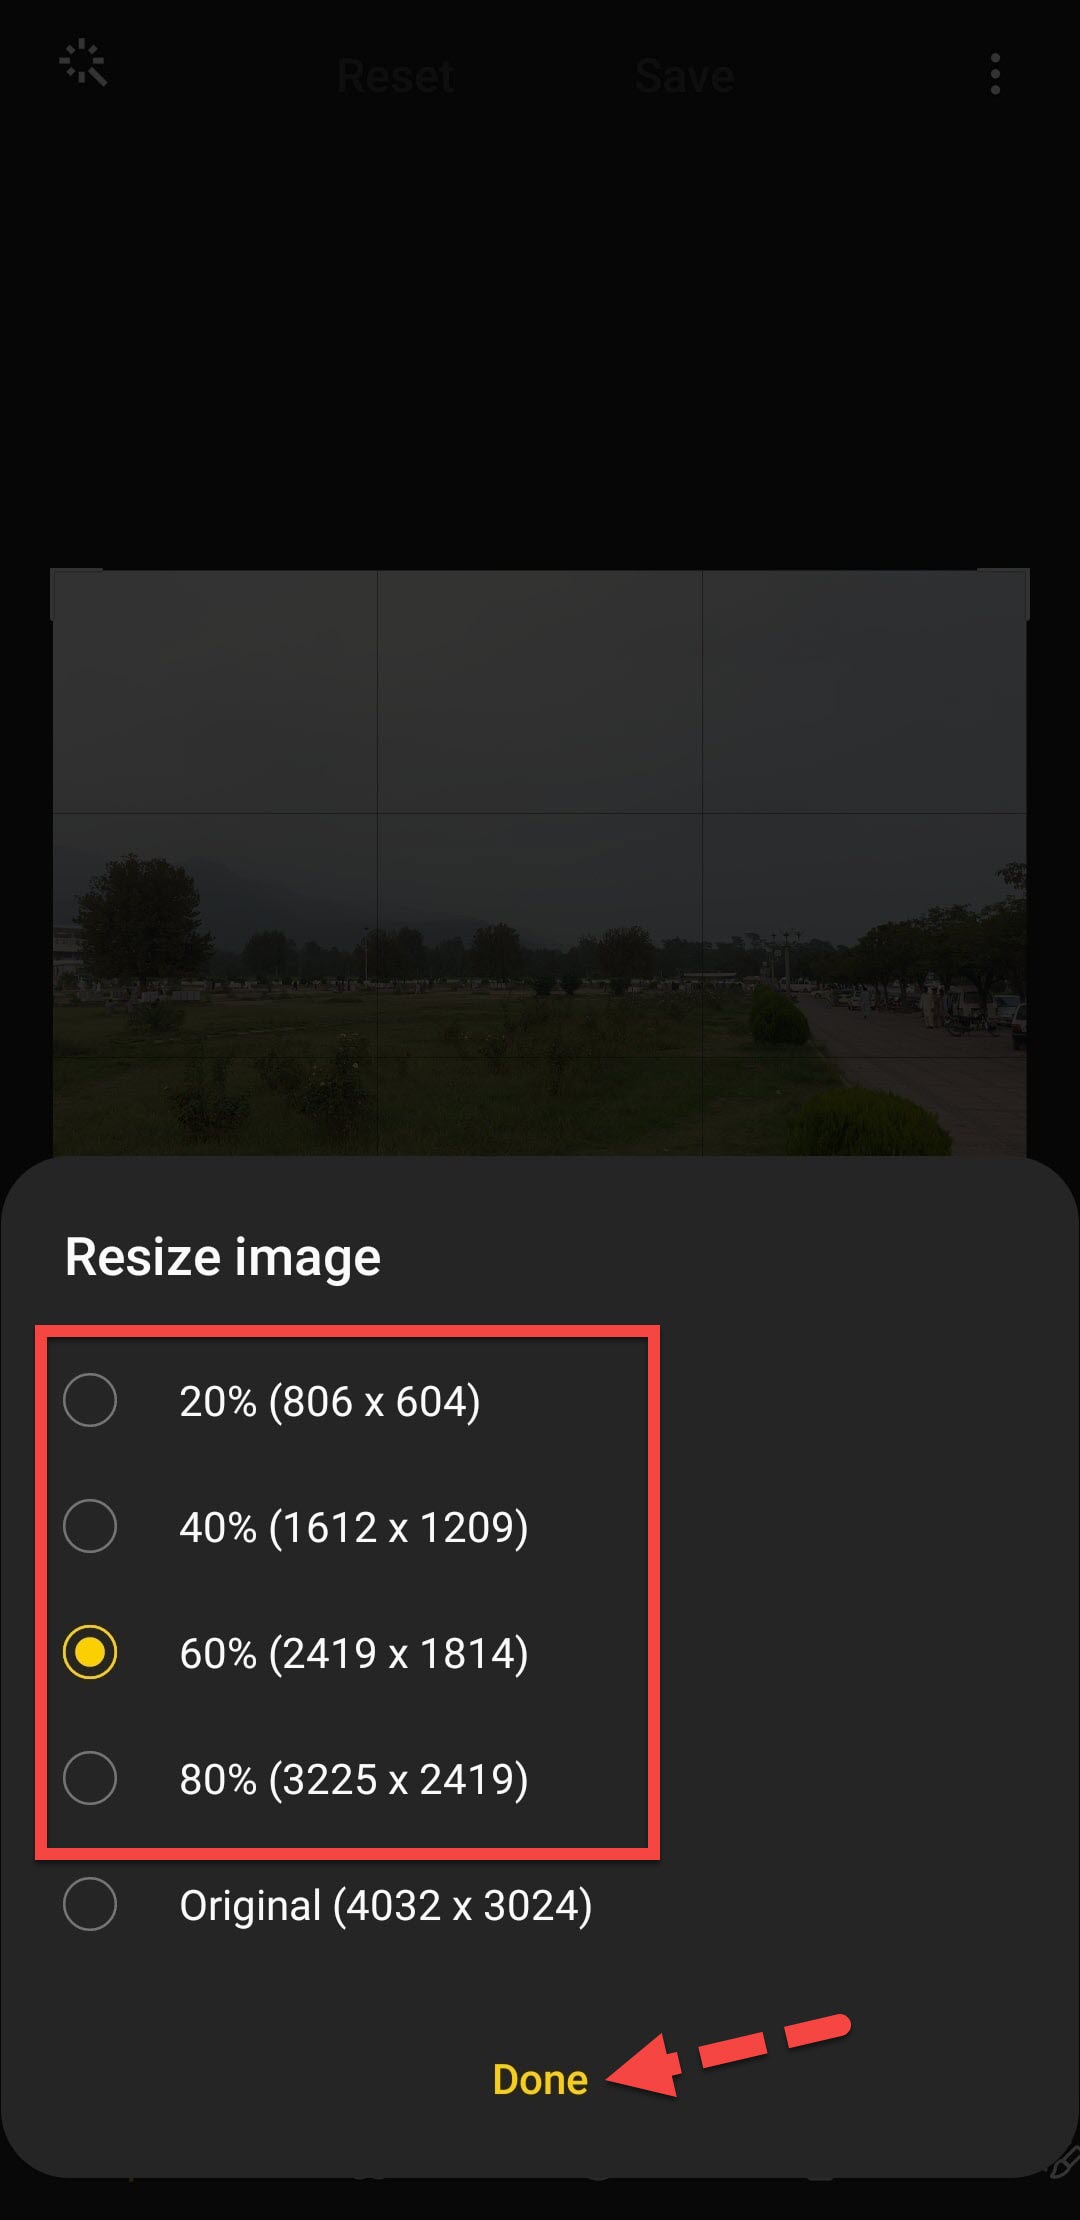 How to Reduce the Photo Size on Samsung Galaxy S9, S10, Note 10 & etc